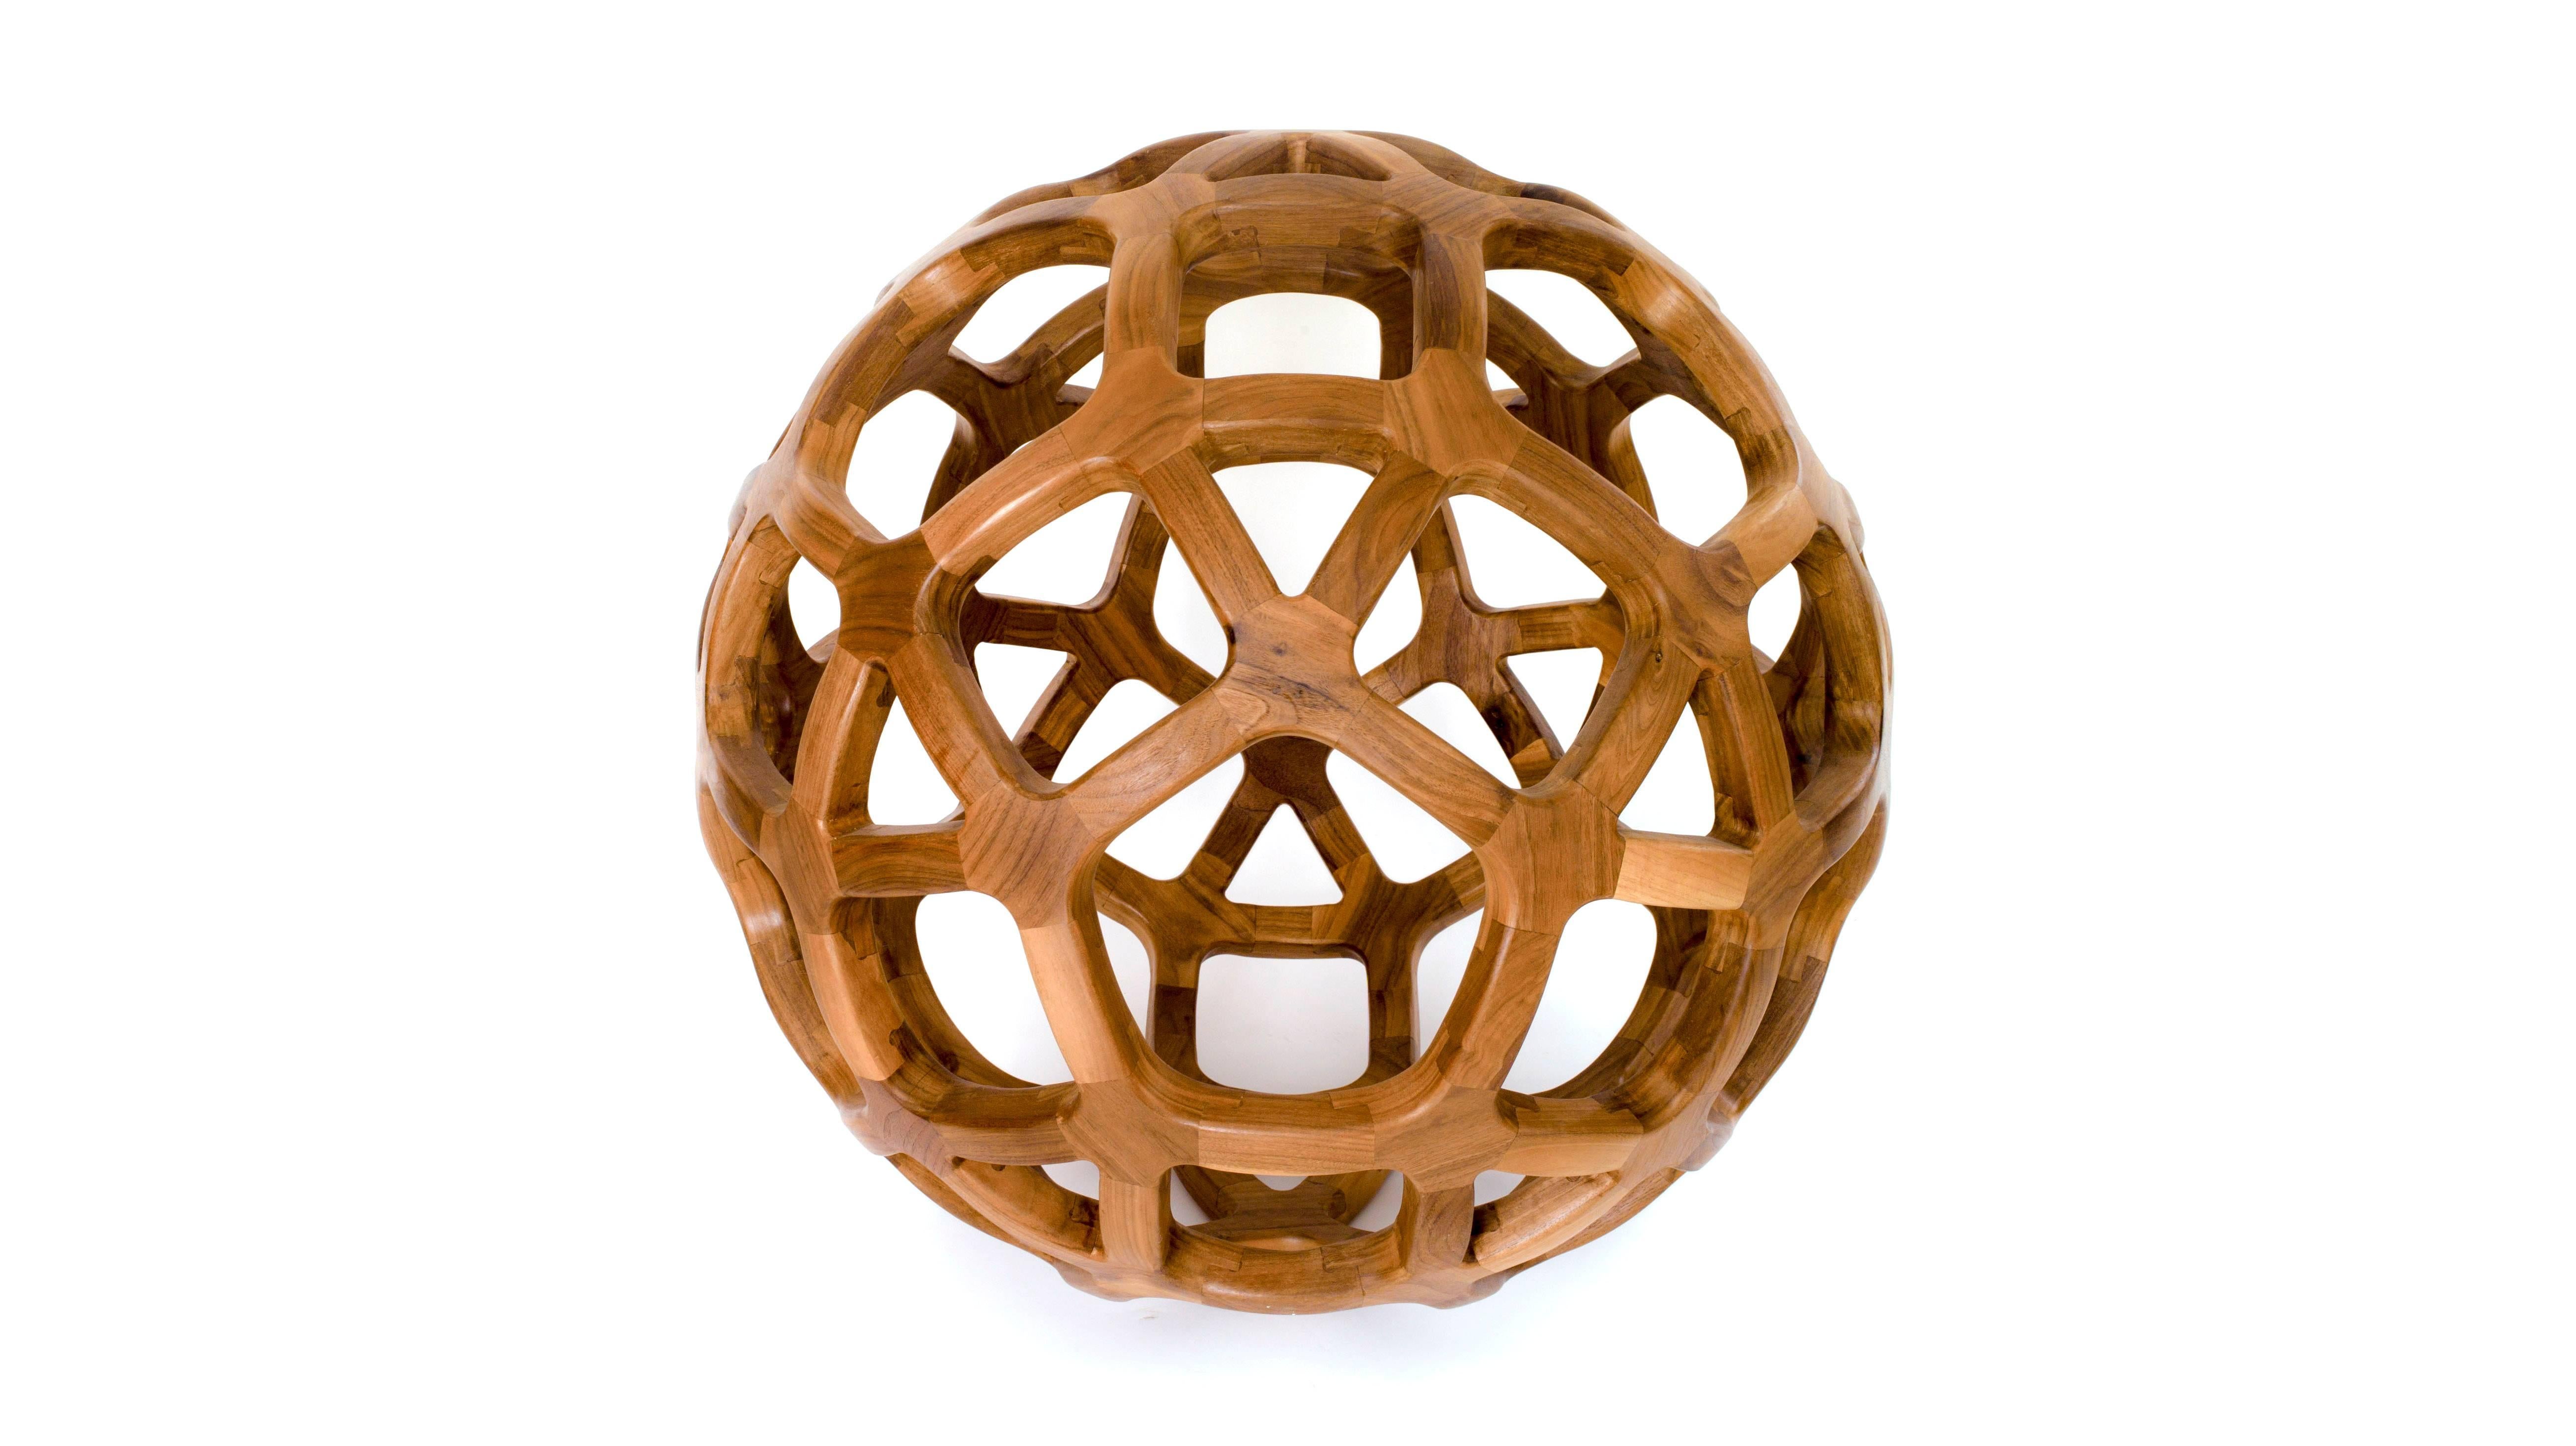 Hand-Crafted Contemporary Mexican Handcrafted Geometric Archimedean Sphere Walnut Sculpture For Sale